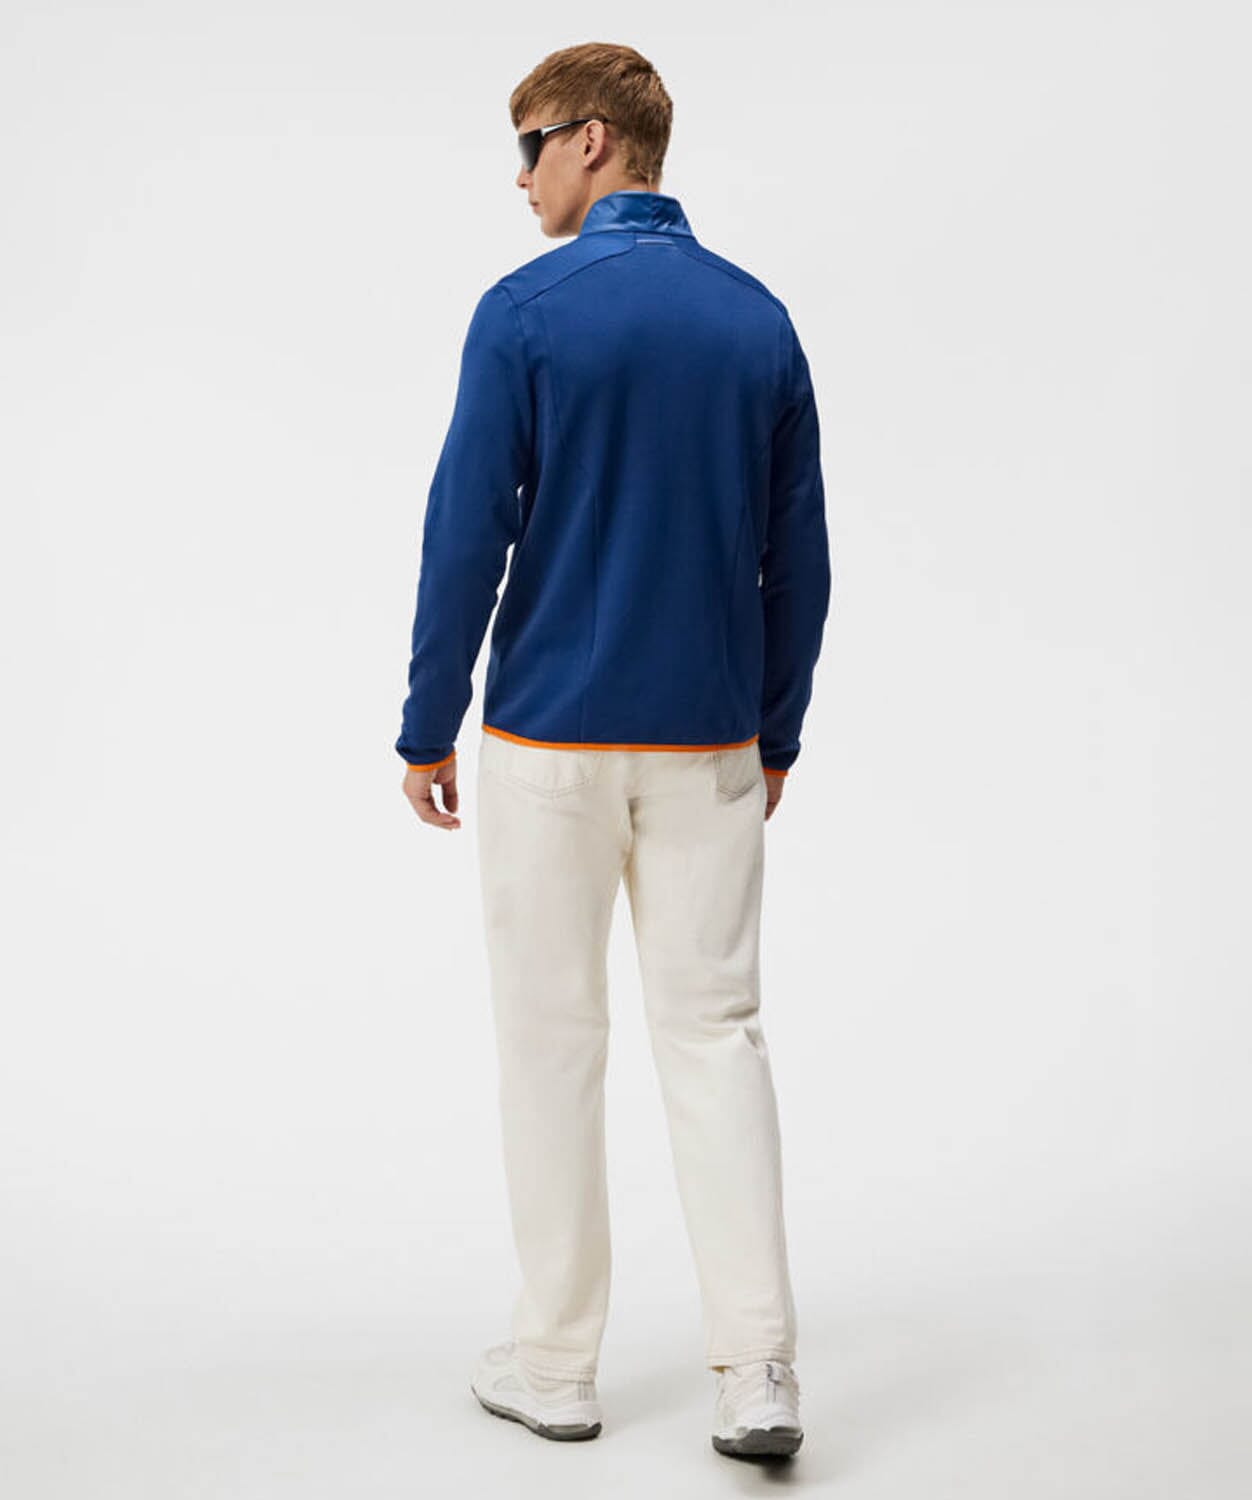 Men's Grouse Mid-Layer Mid Layer J.Lindeberg 